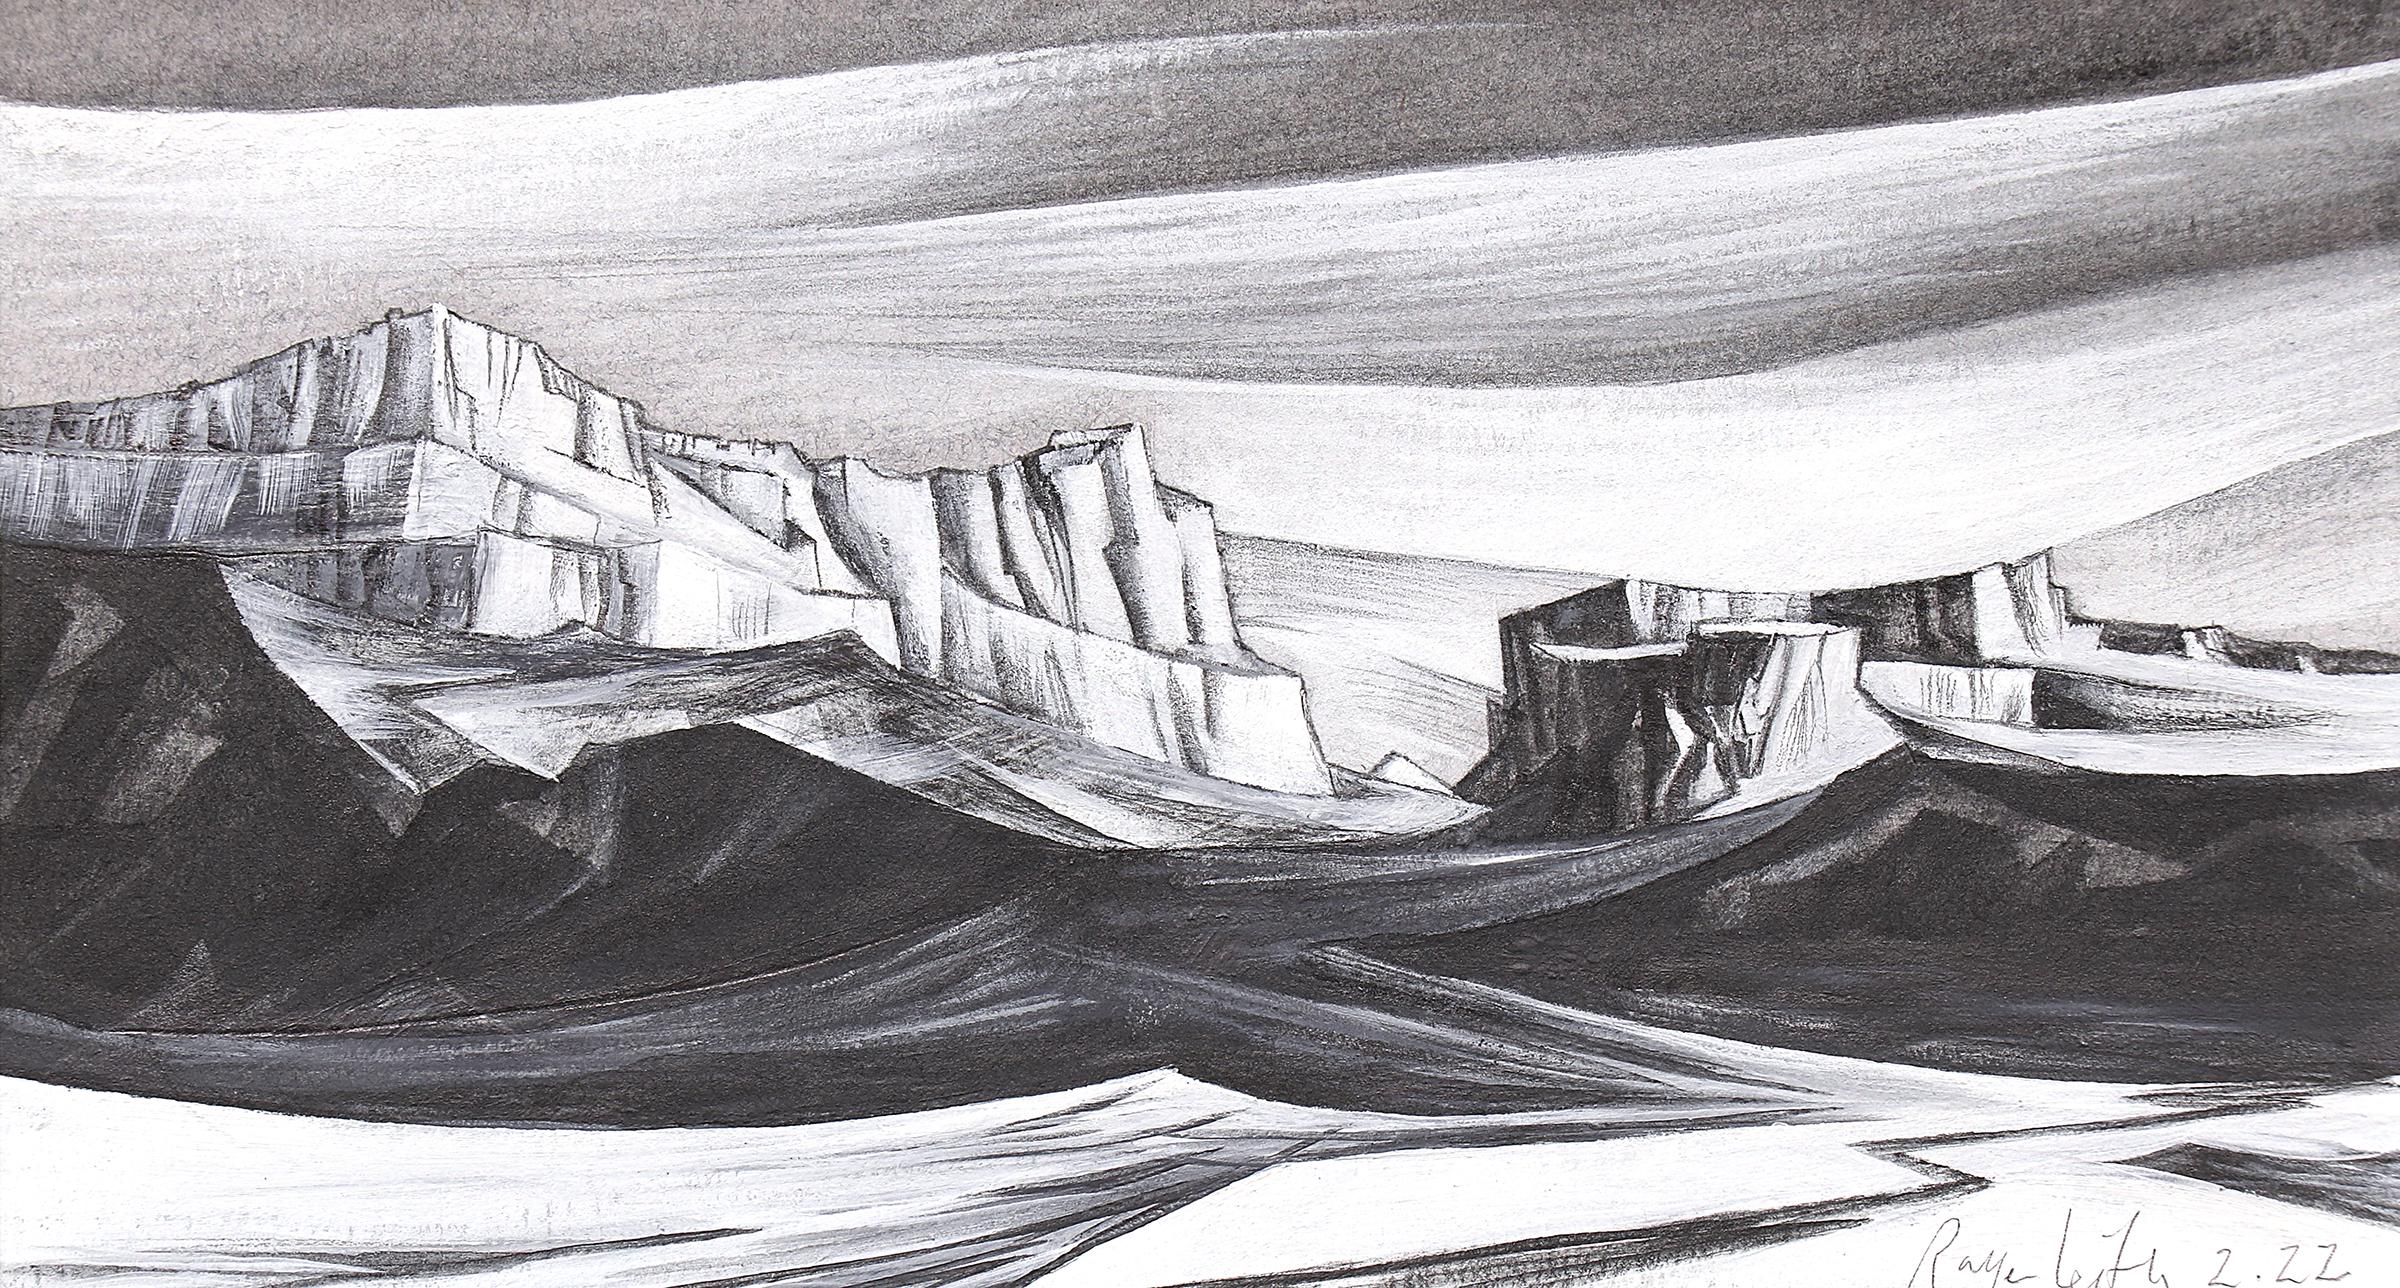 Pair of Abstract Graphite Casein Southwestern Landscape Drawings, Black White 4